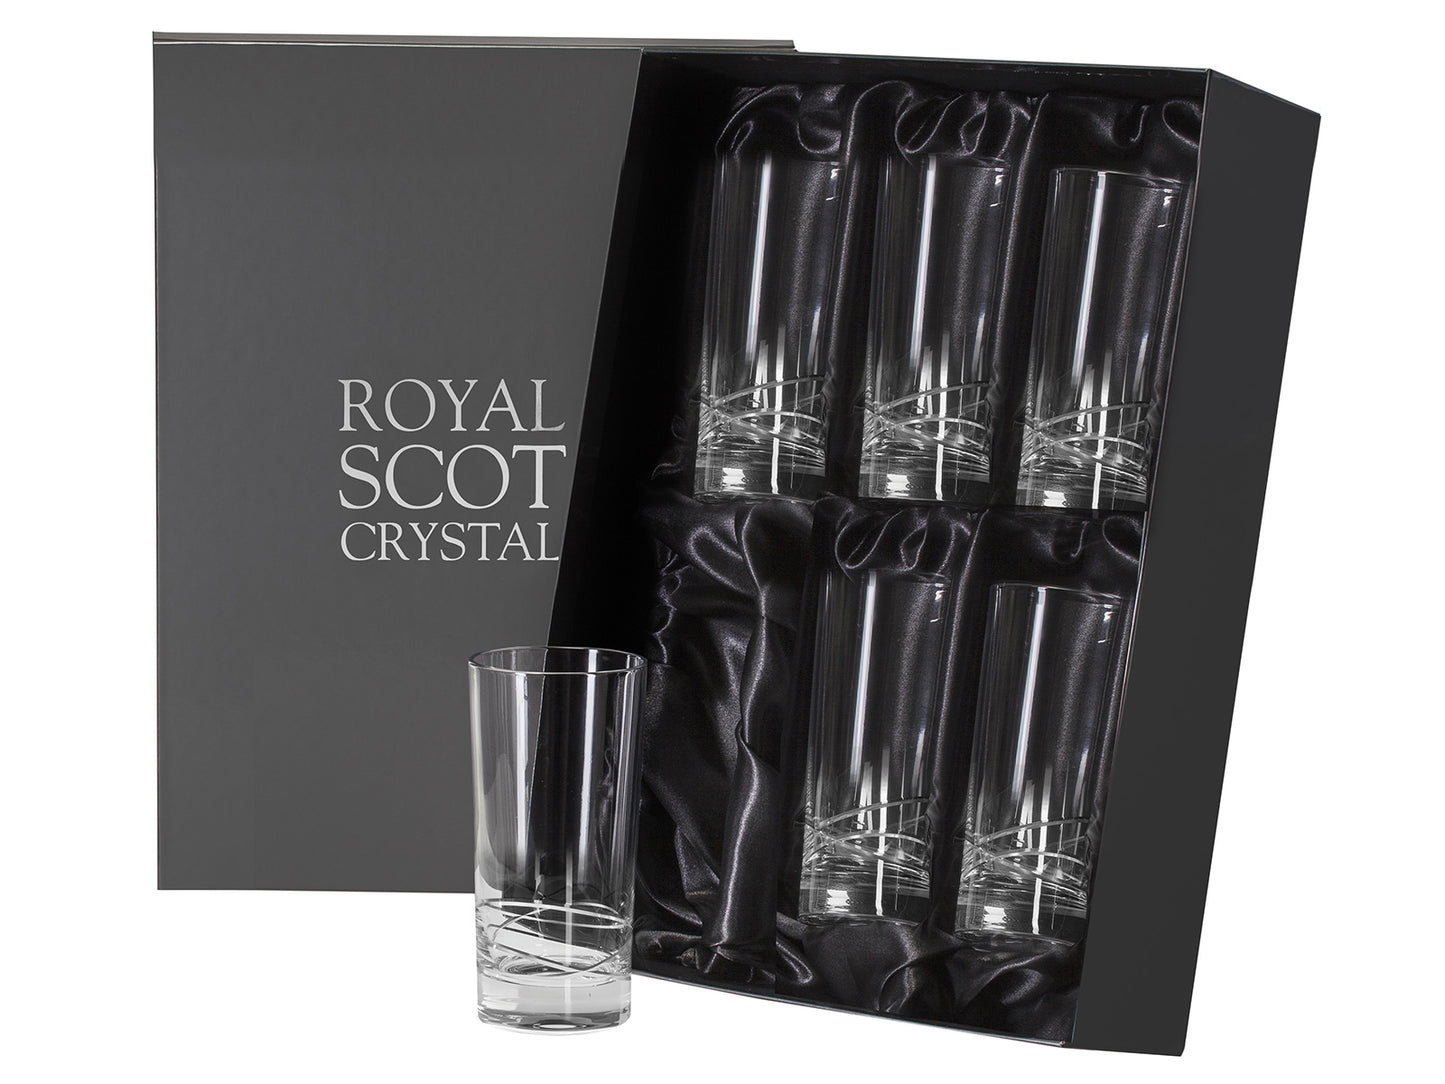 A set of six matching crystal highball tumblers with an orbital design cut around the base. They come in a gunmetal presentation box.